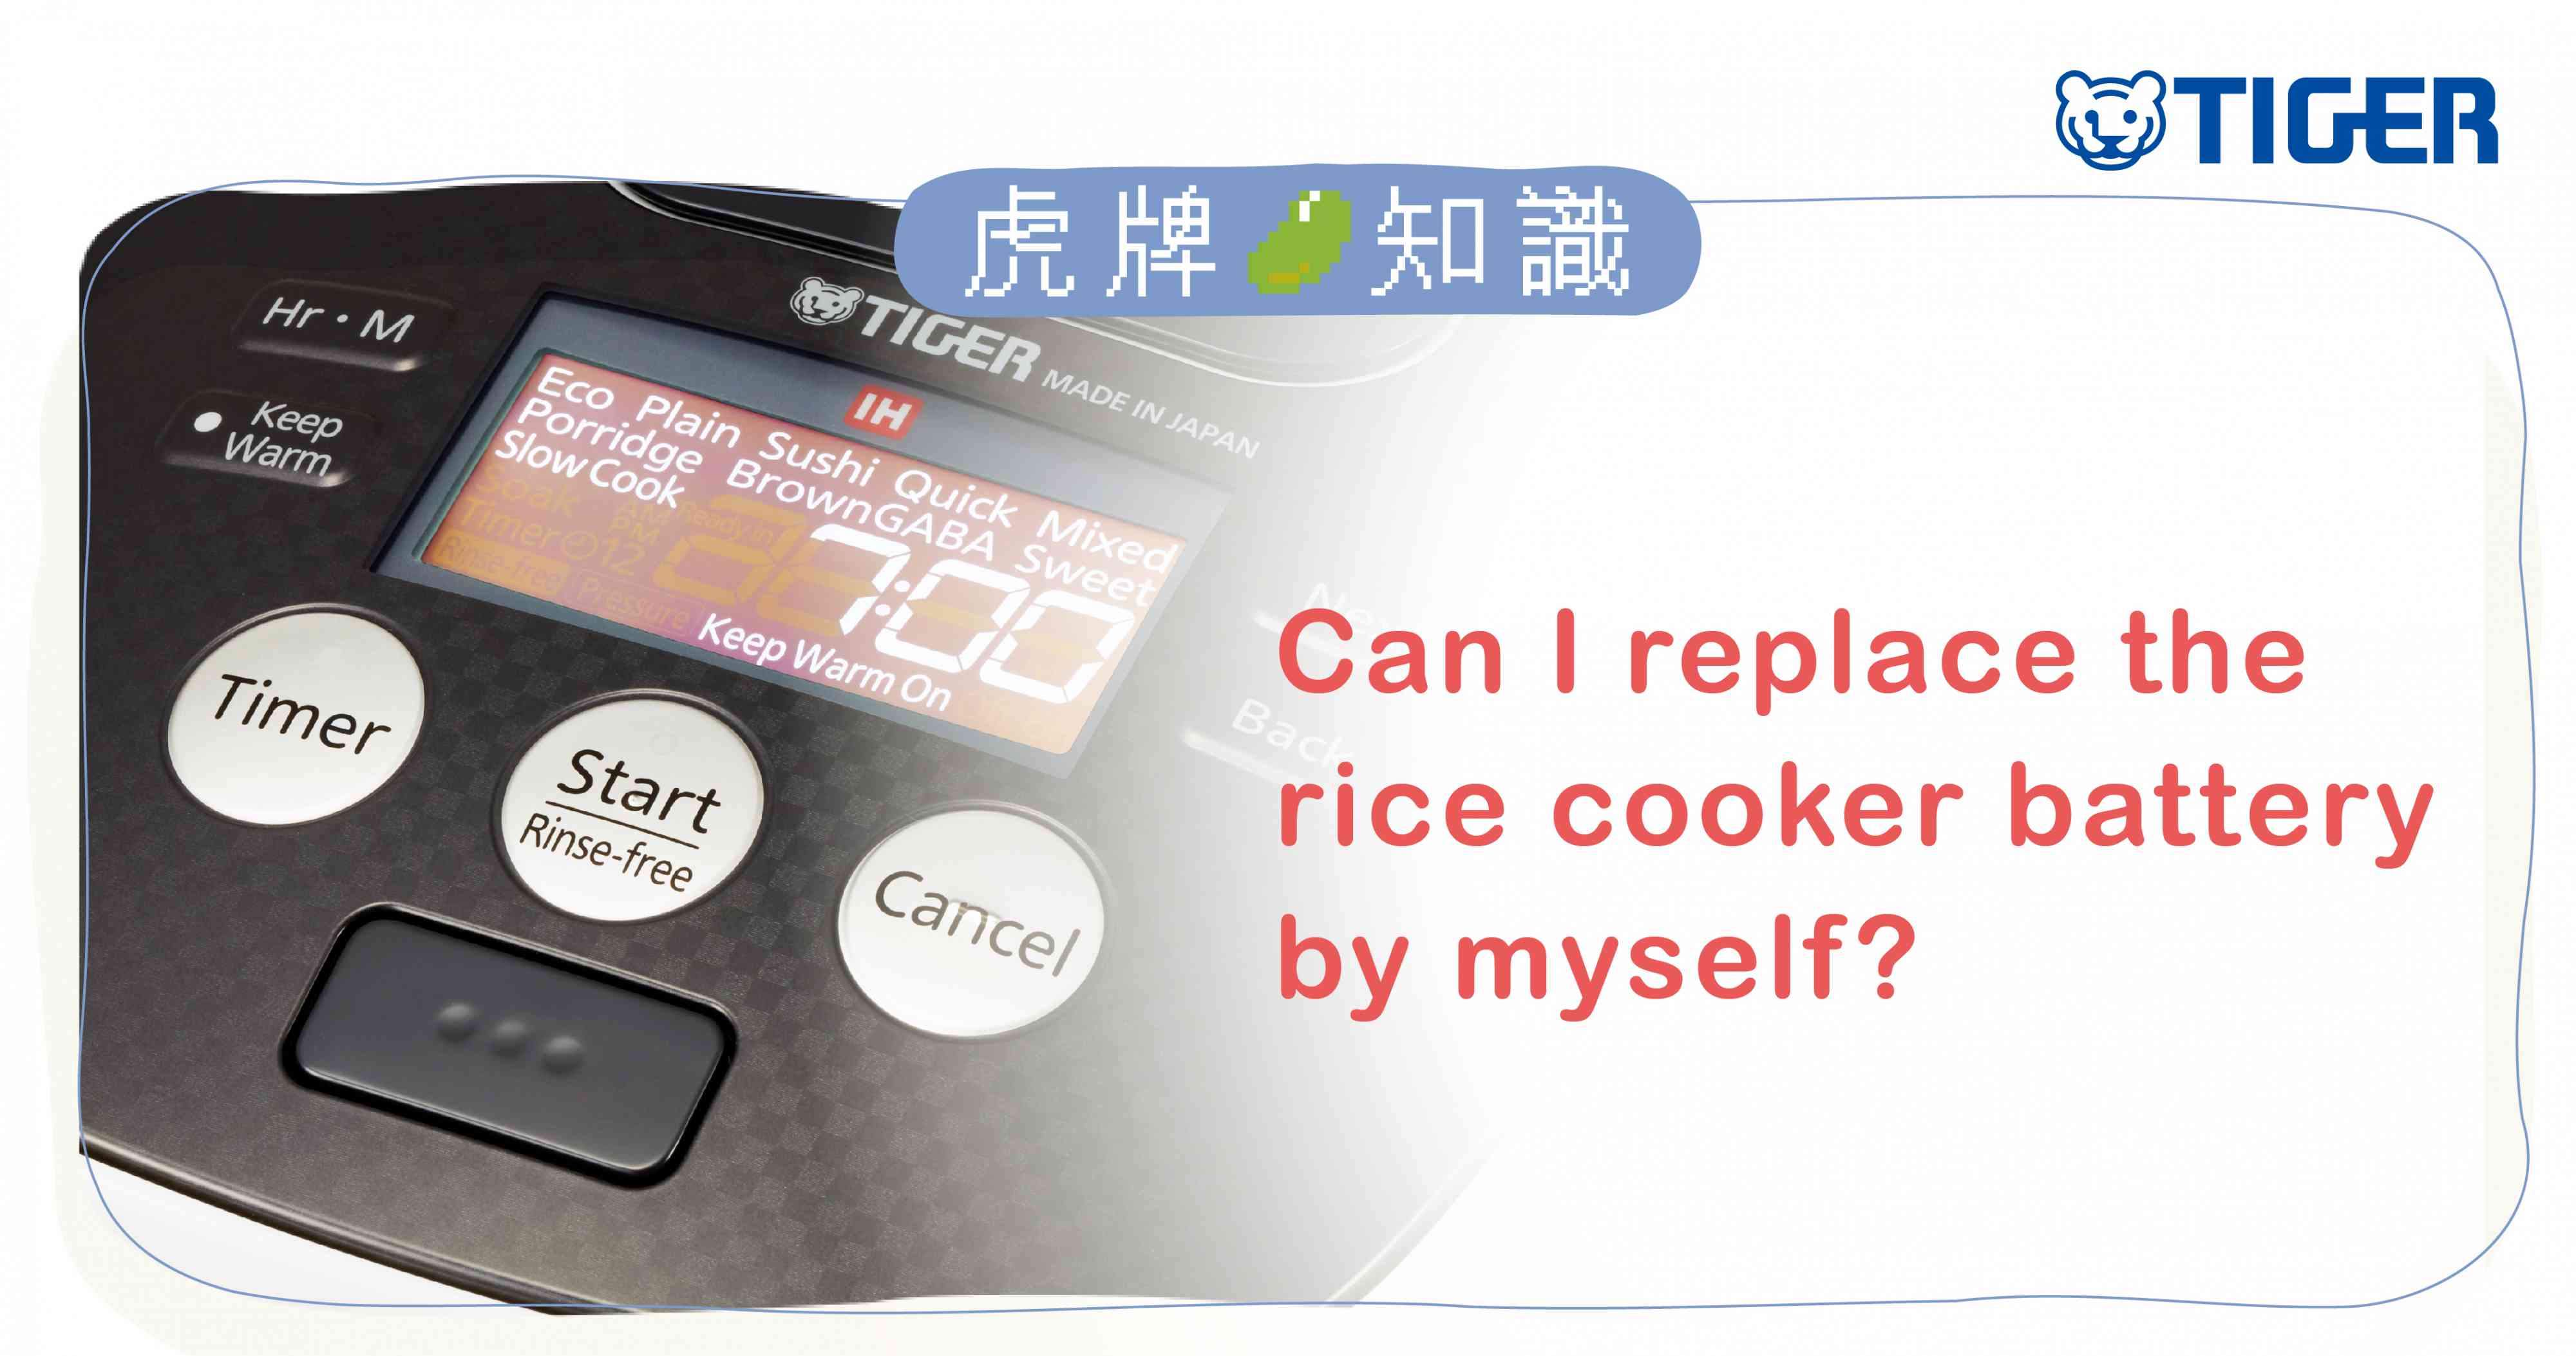 tiger-trivia-can-I-replace-the-rice-cooker-battery-by-myself-en-2.jpg (266 KB)